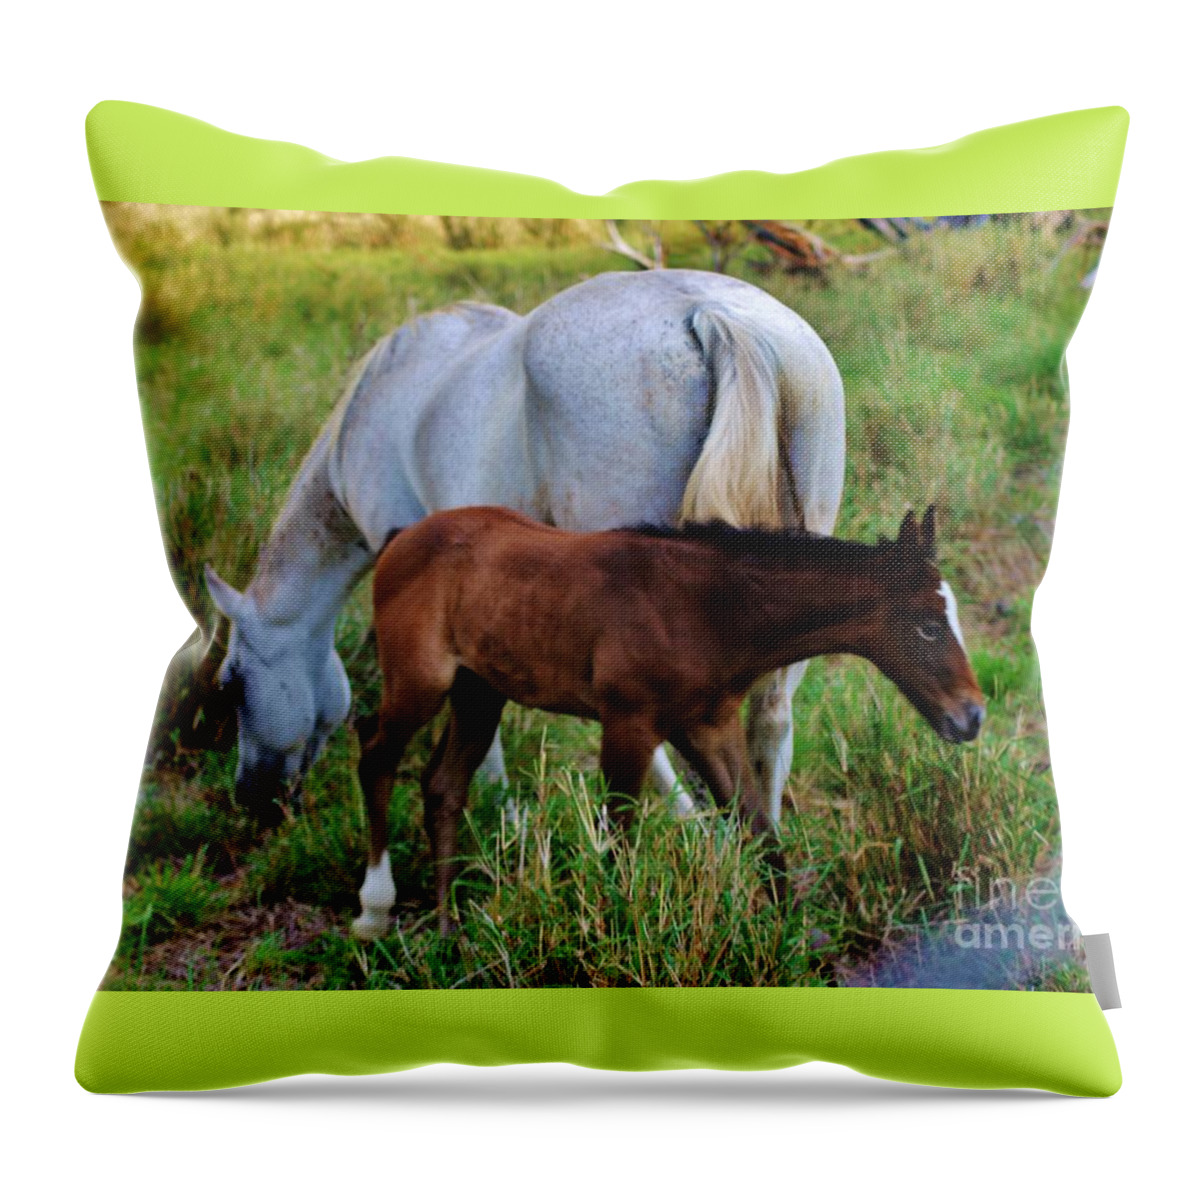 Horses Throw Pillow featuring the photograph Mother and Child by Craig Wood